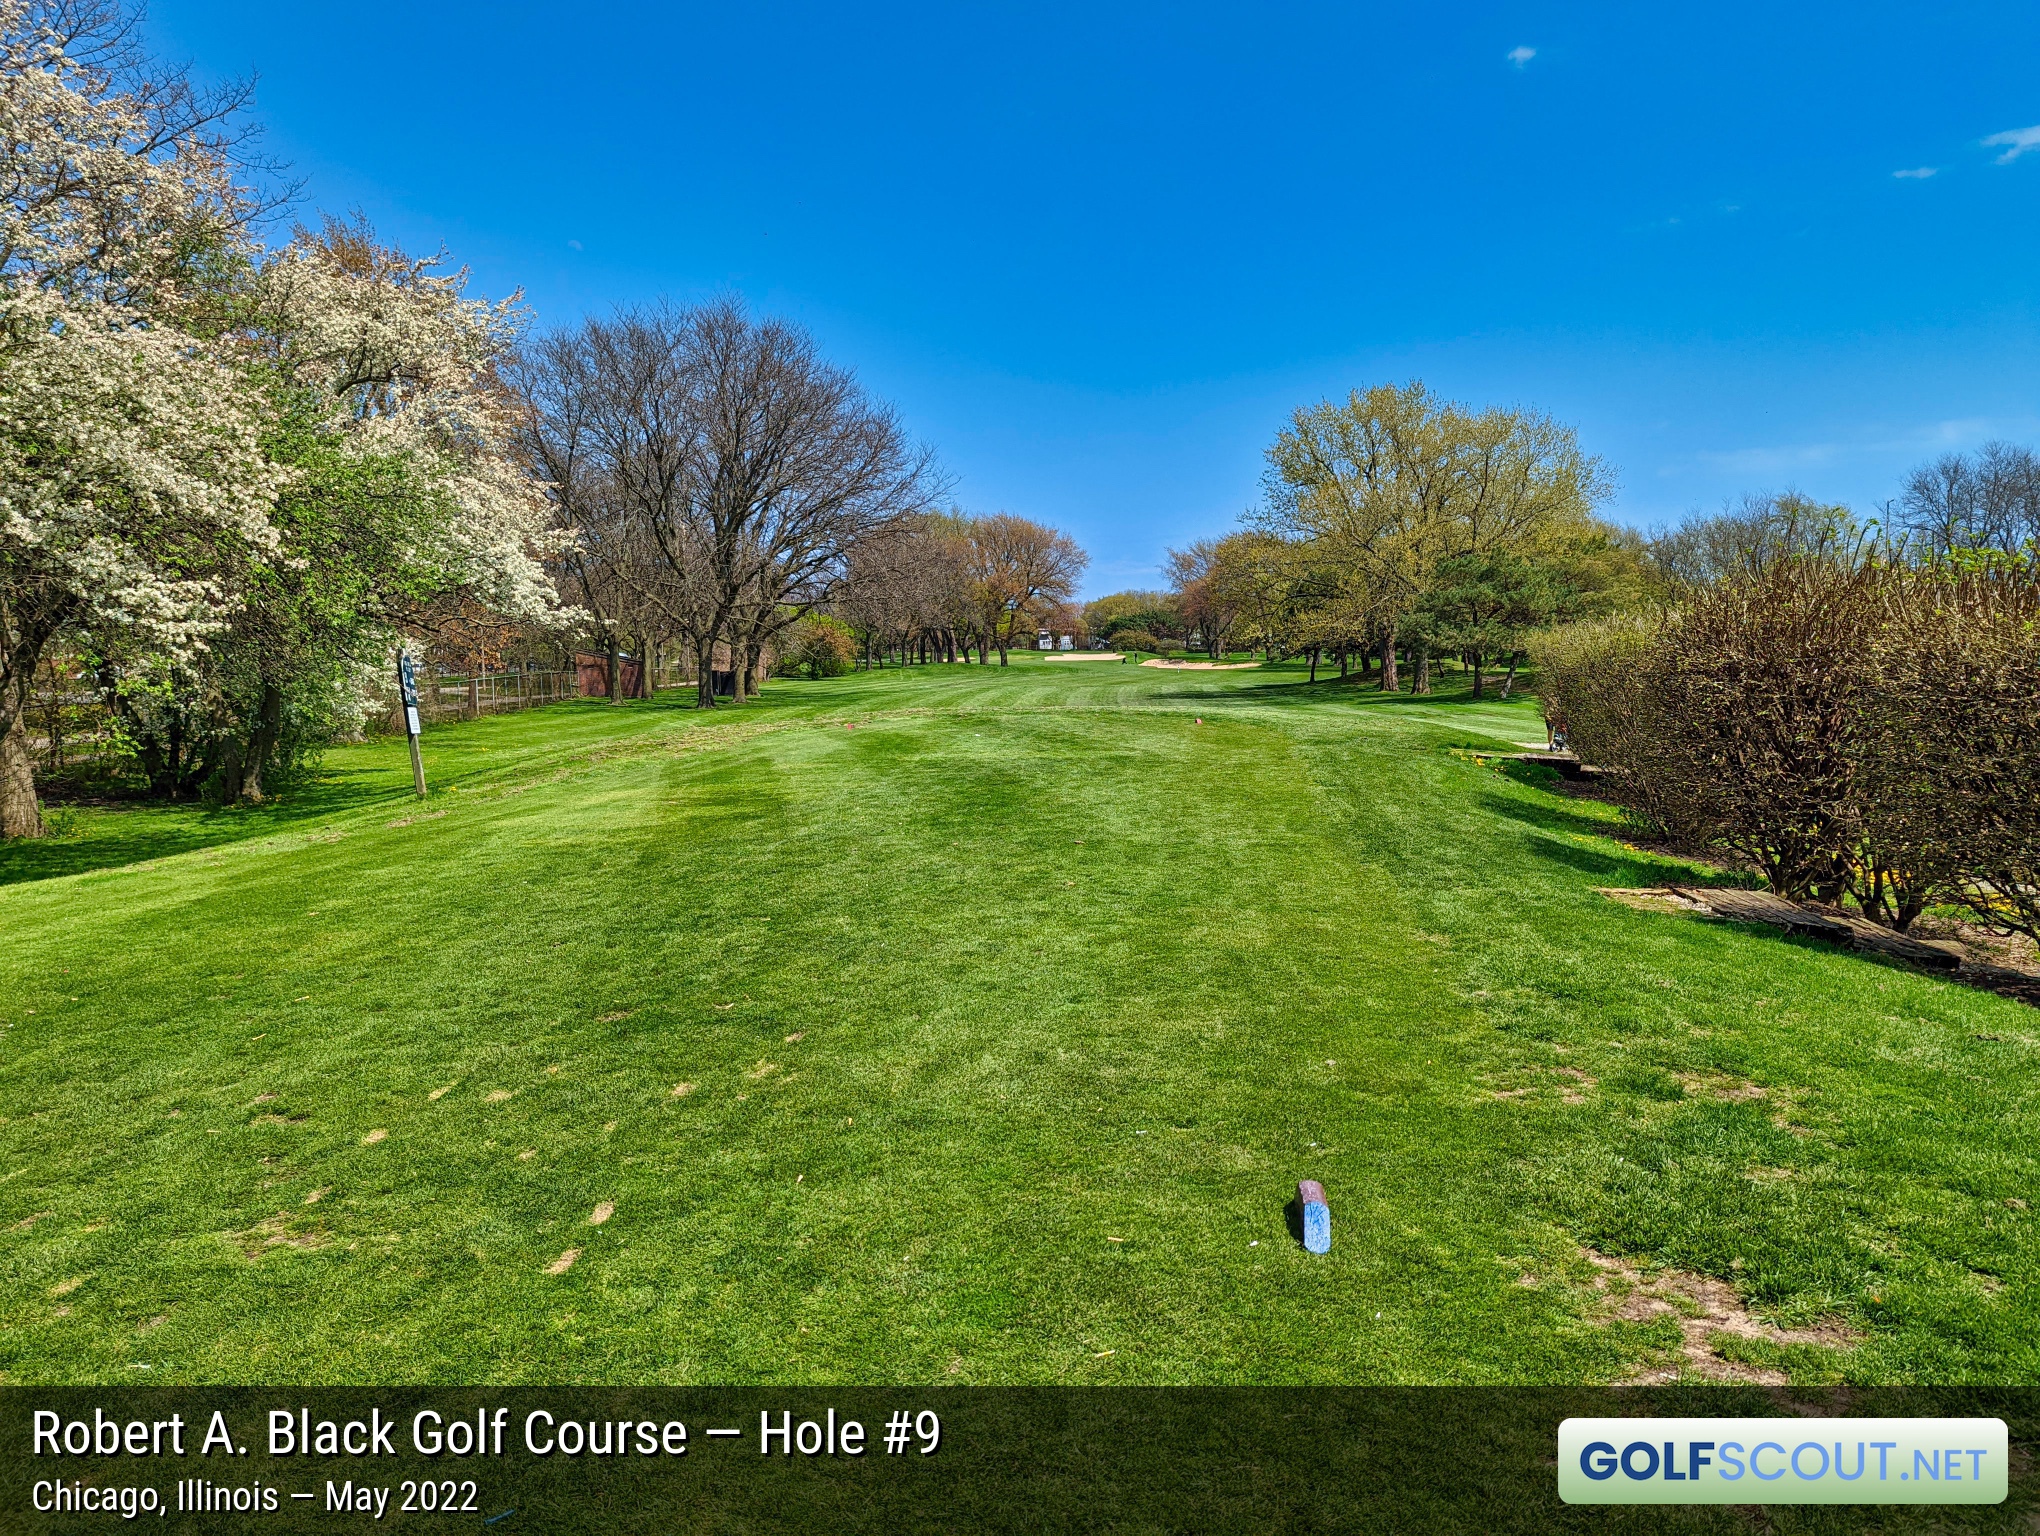 Photo of hole #9 at Robert A. Black Golf Course in Chicago, Illinois. 